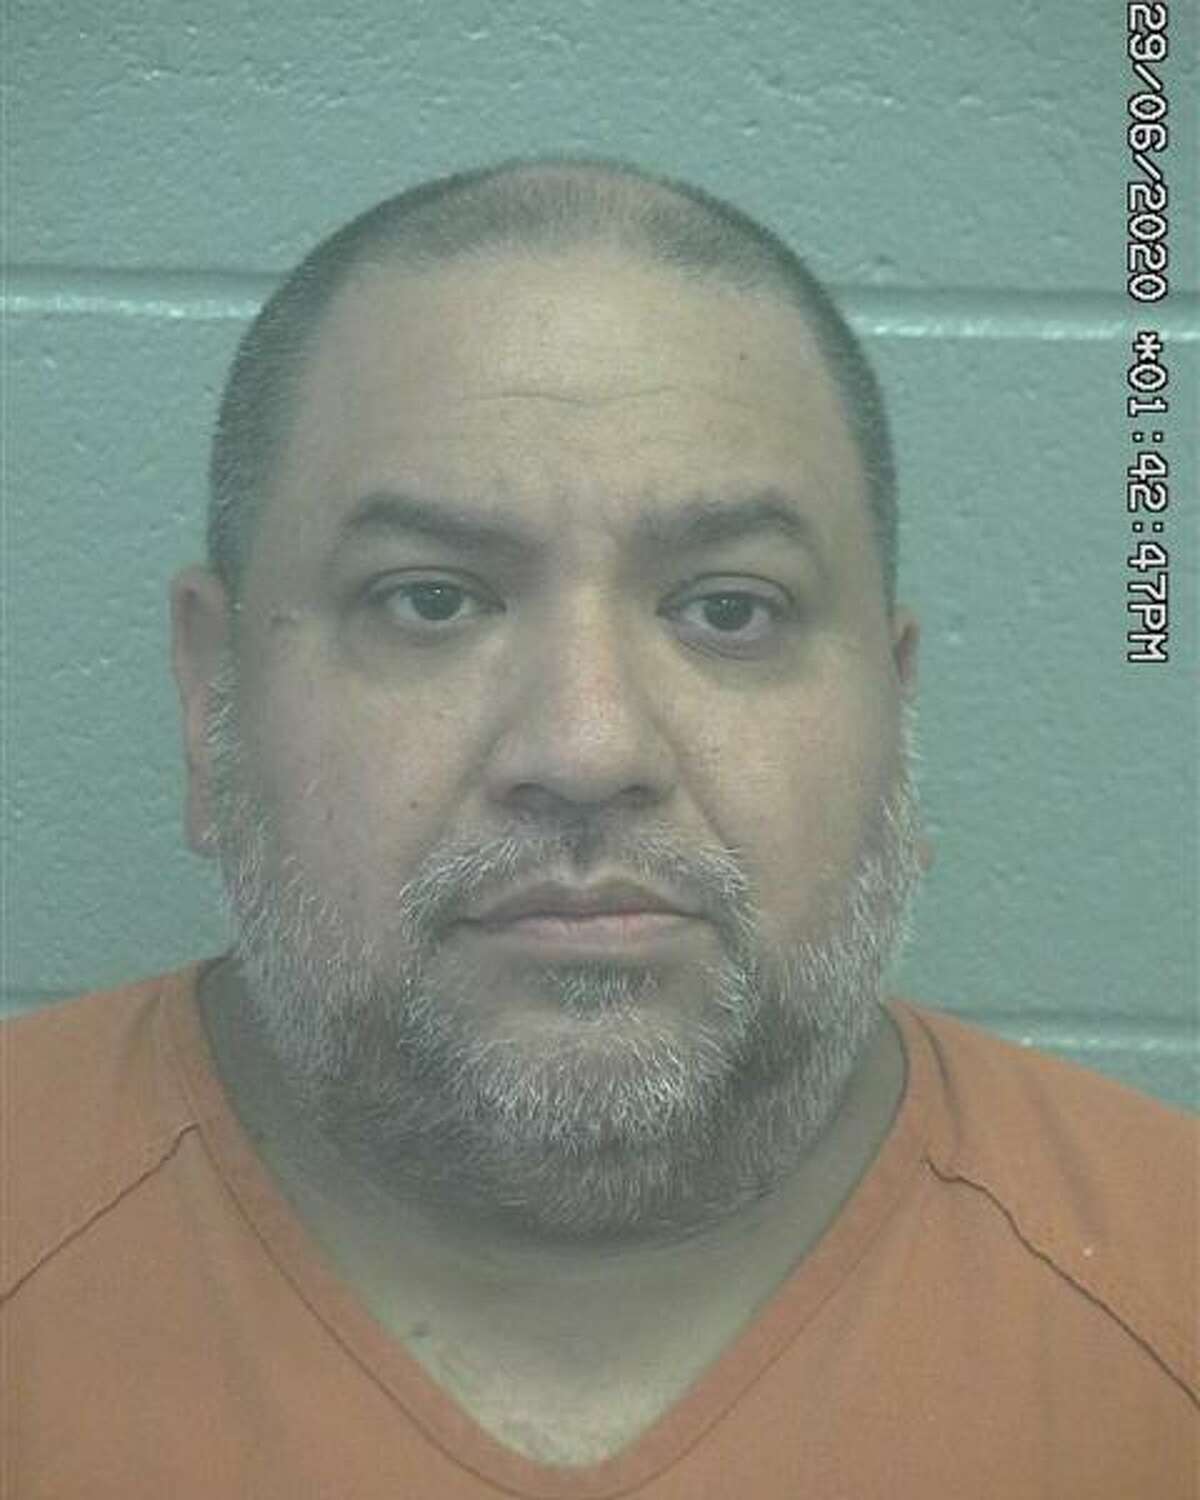 Ismael Romero received a sentence of 30 years in prison on Thursday, Aug. 5, 2021,  after pleading guilty to first-degree continuous sexual abuse of a child.